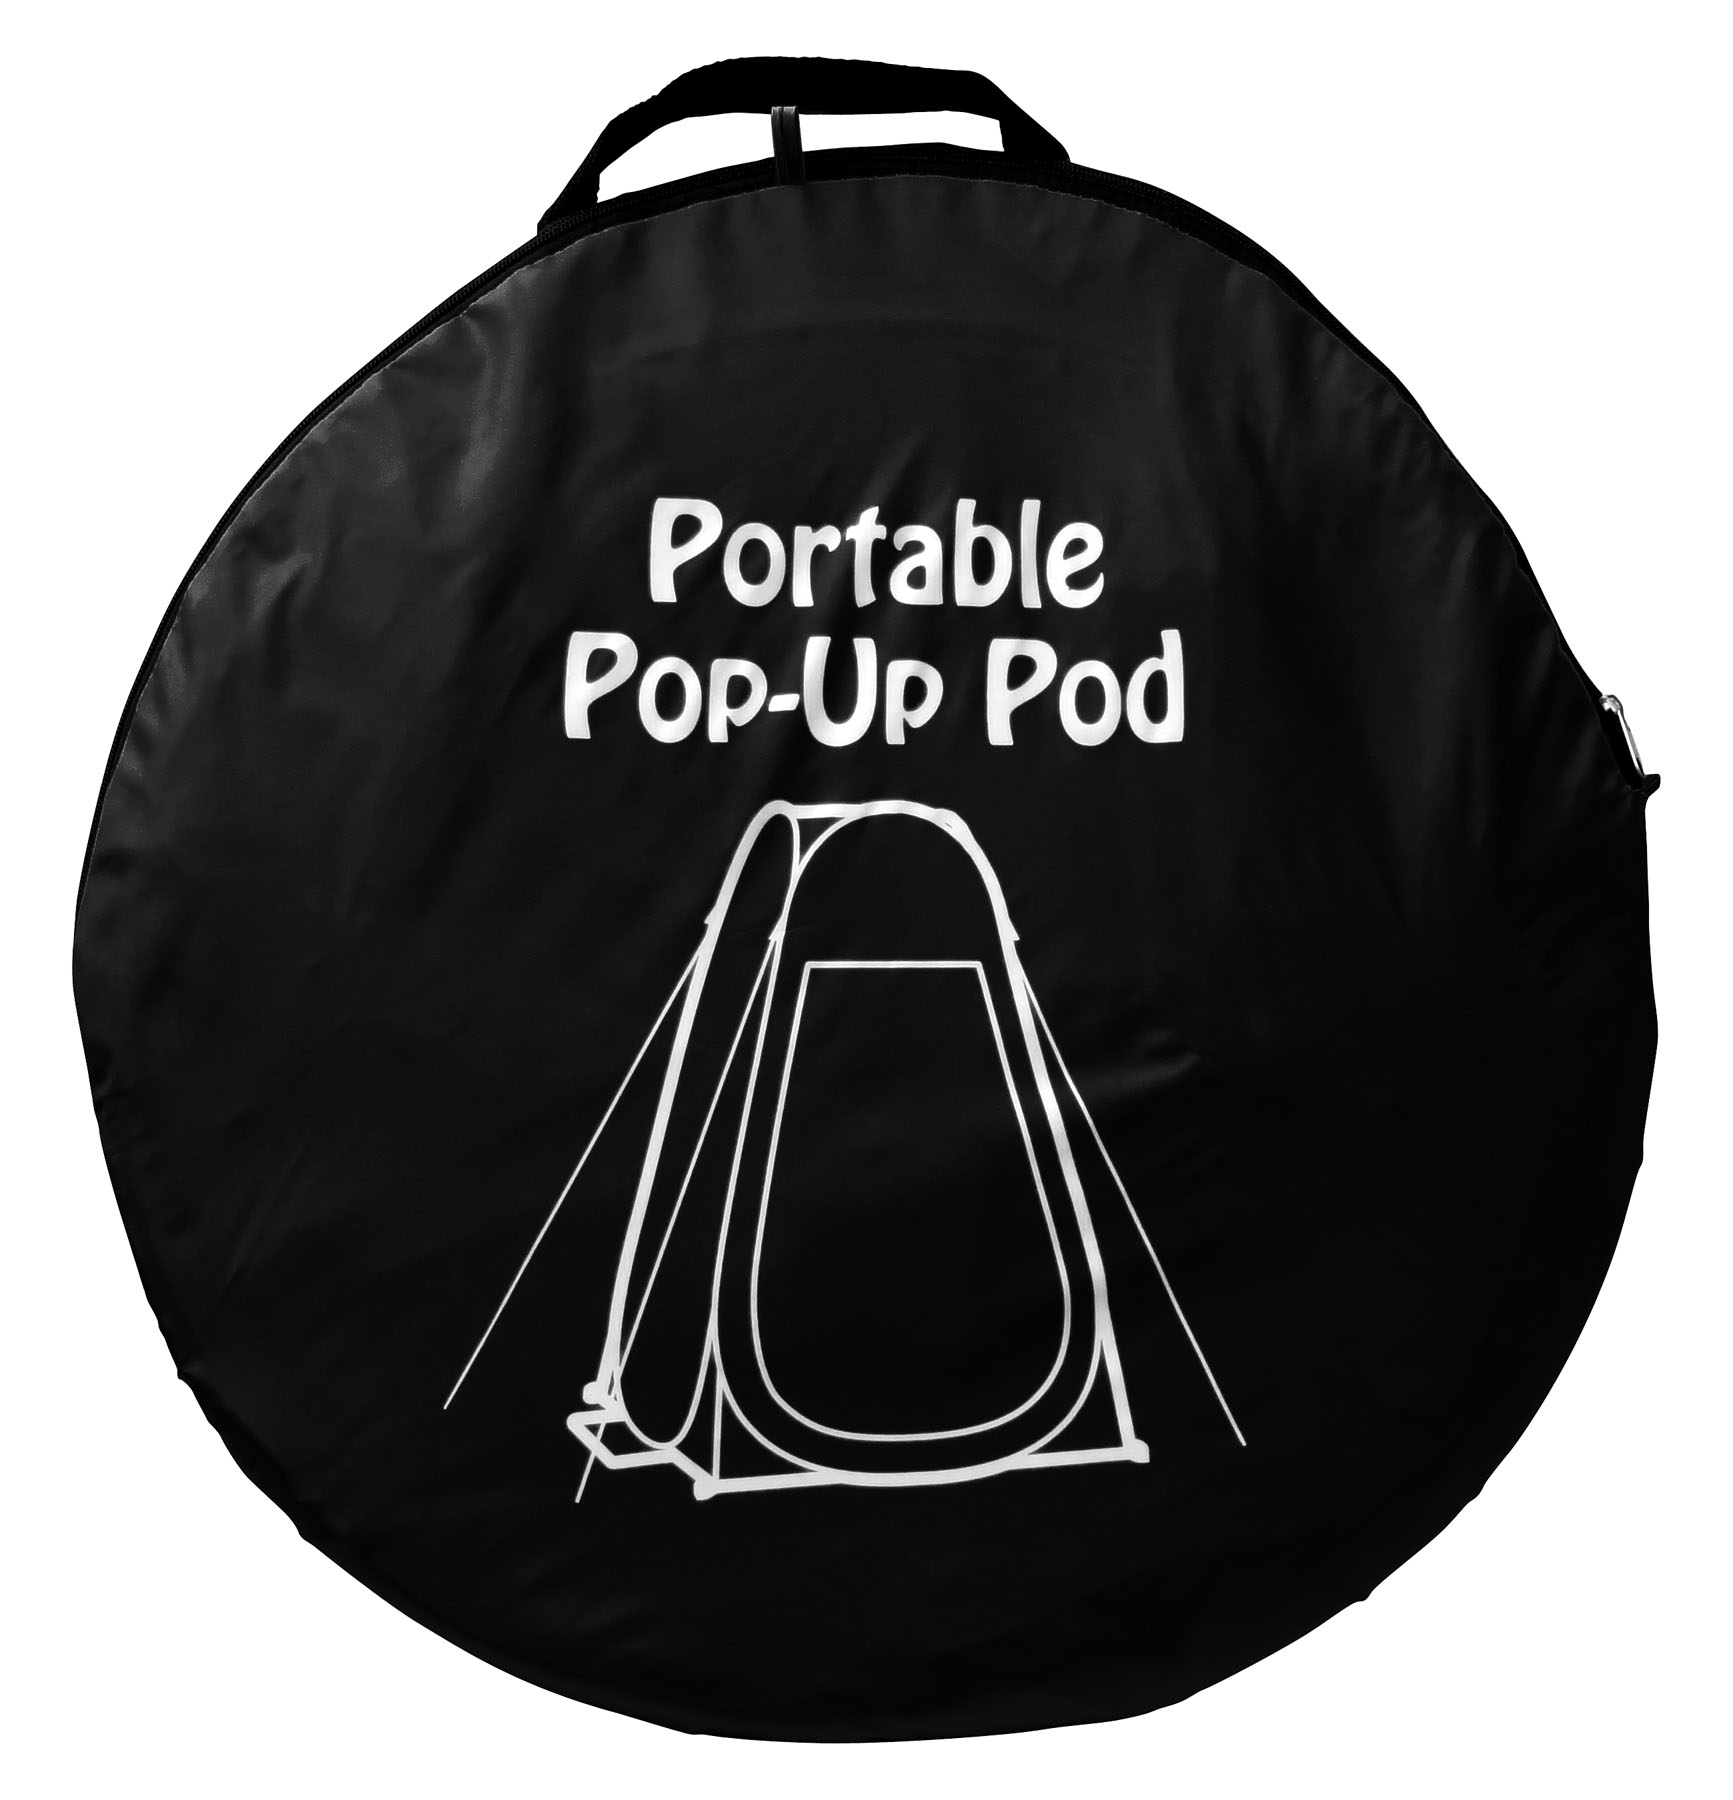 GigaTent 1-Person Pop Up Privacy Tent for Camping Changing Room, Portable Shower Station (Black) - image 3 of 7